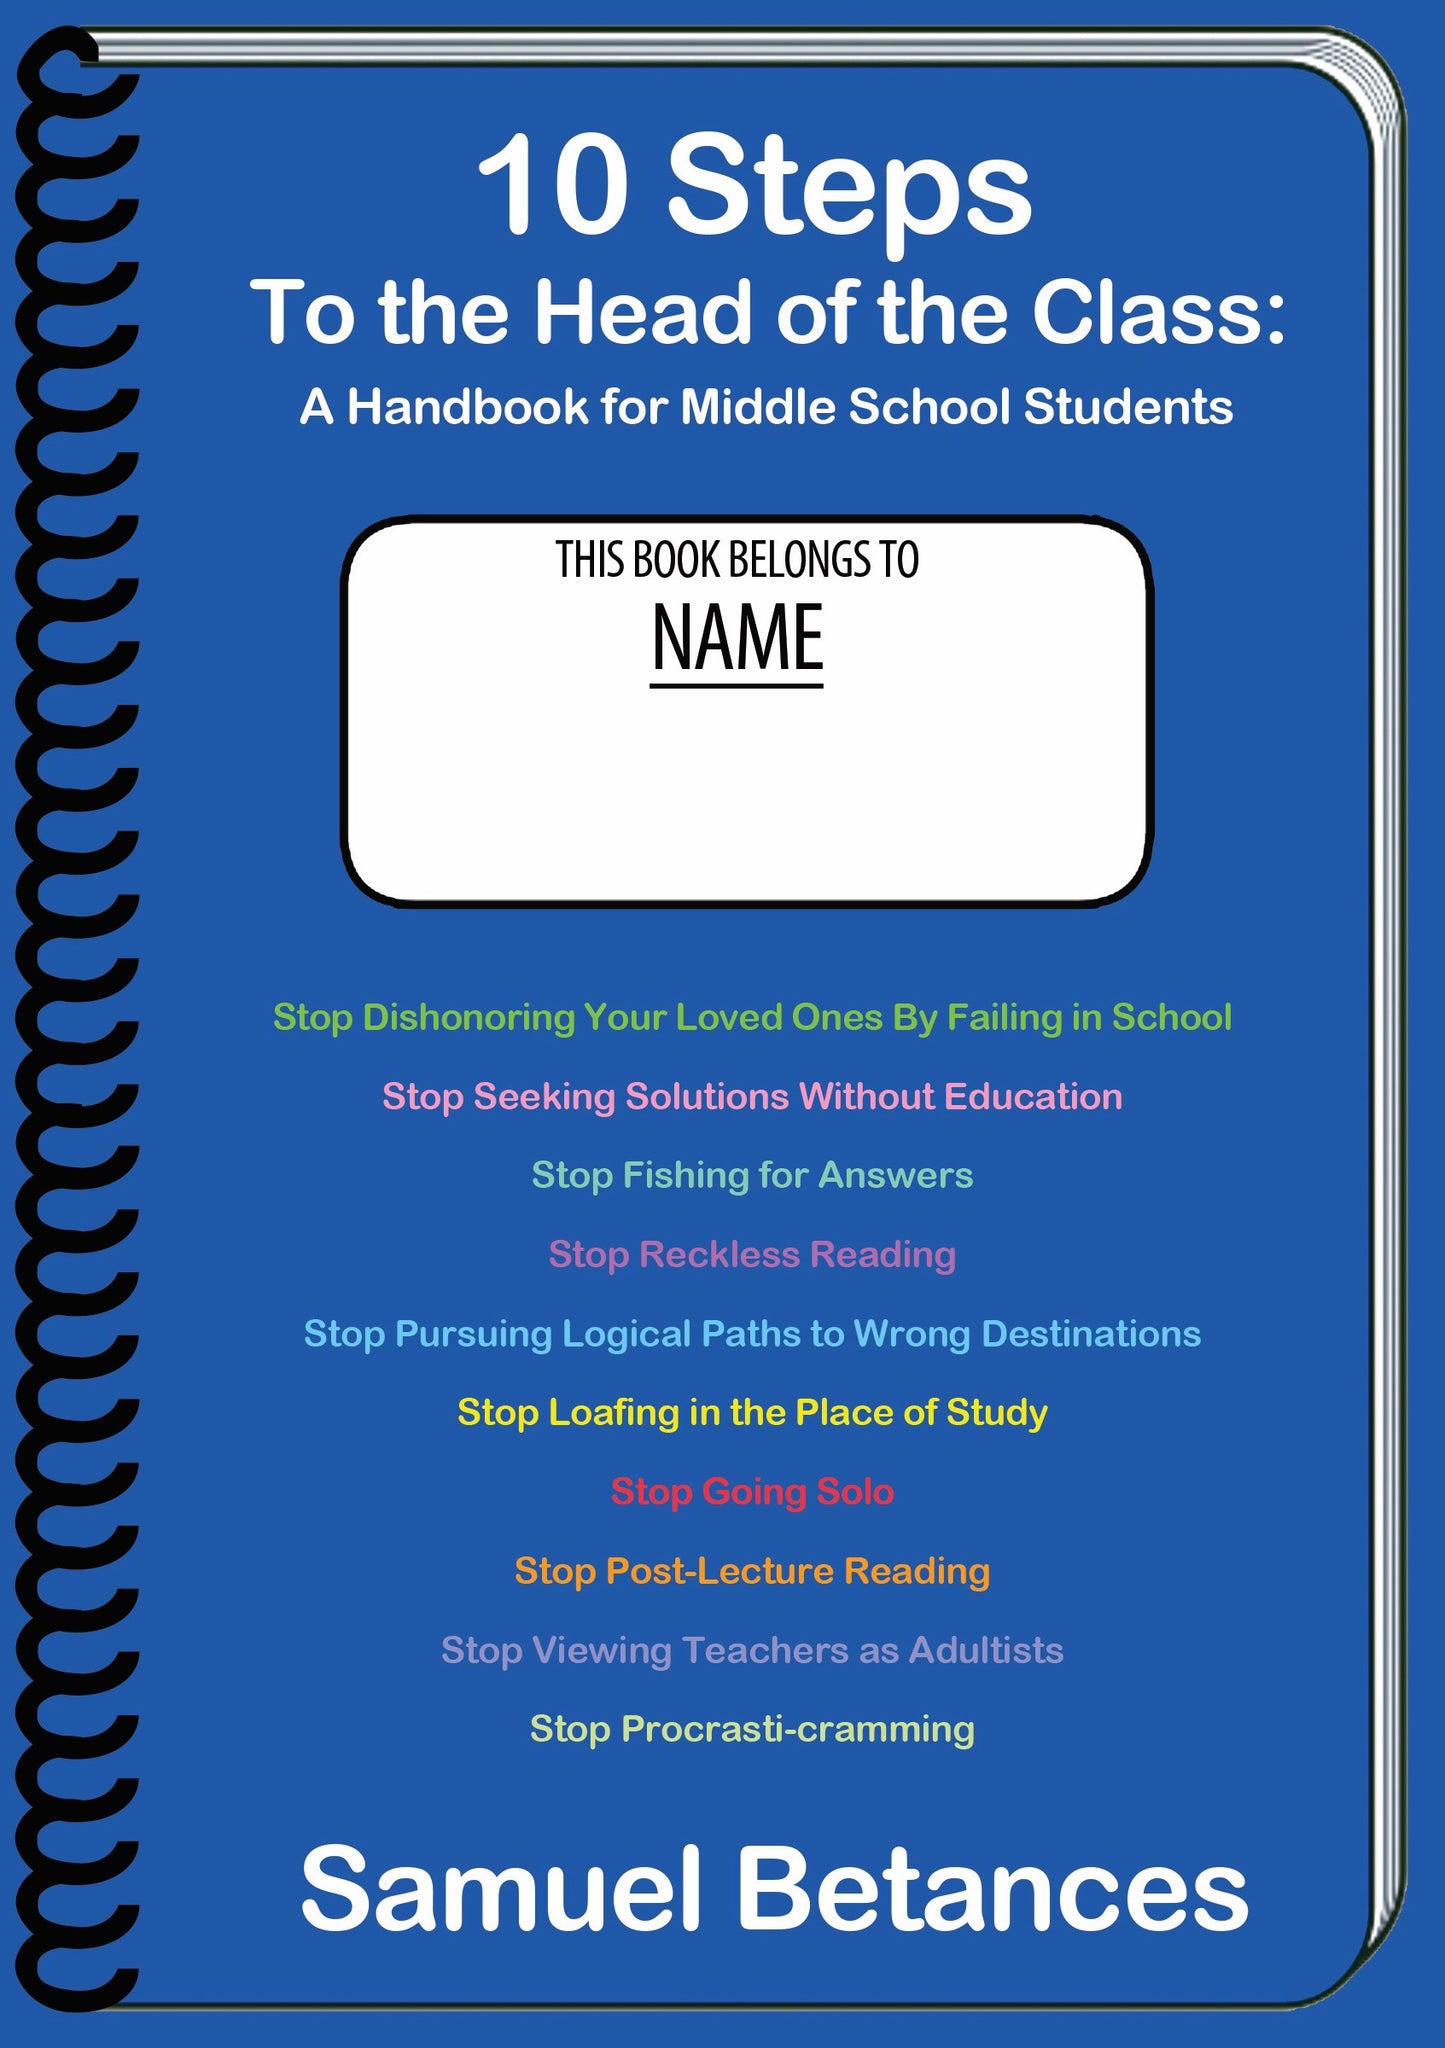 10 Steps To the Head of the Class: A Handbook for Middle School Students